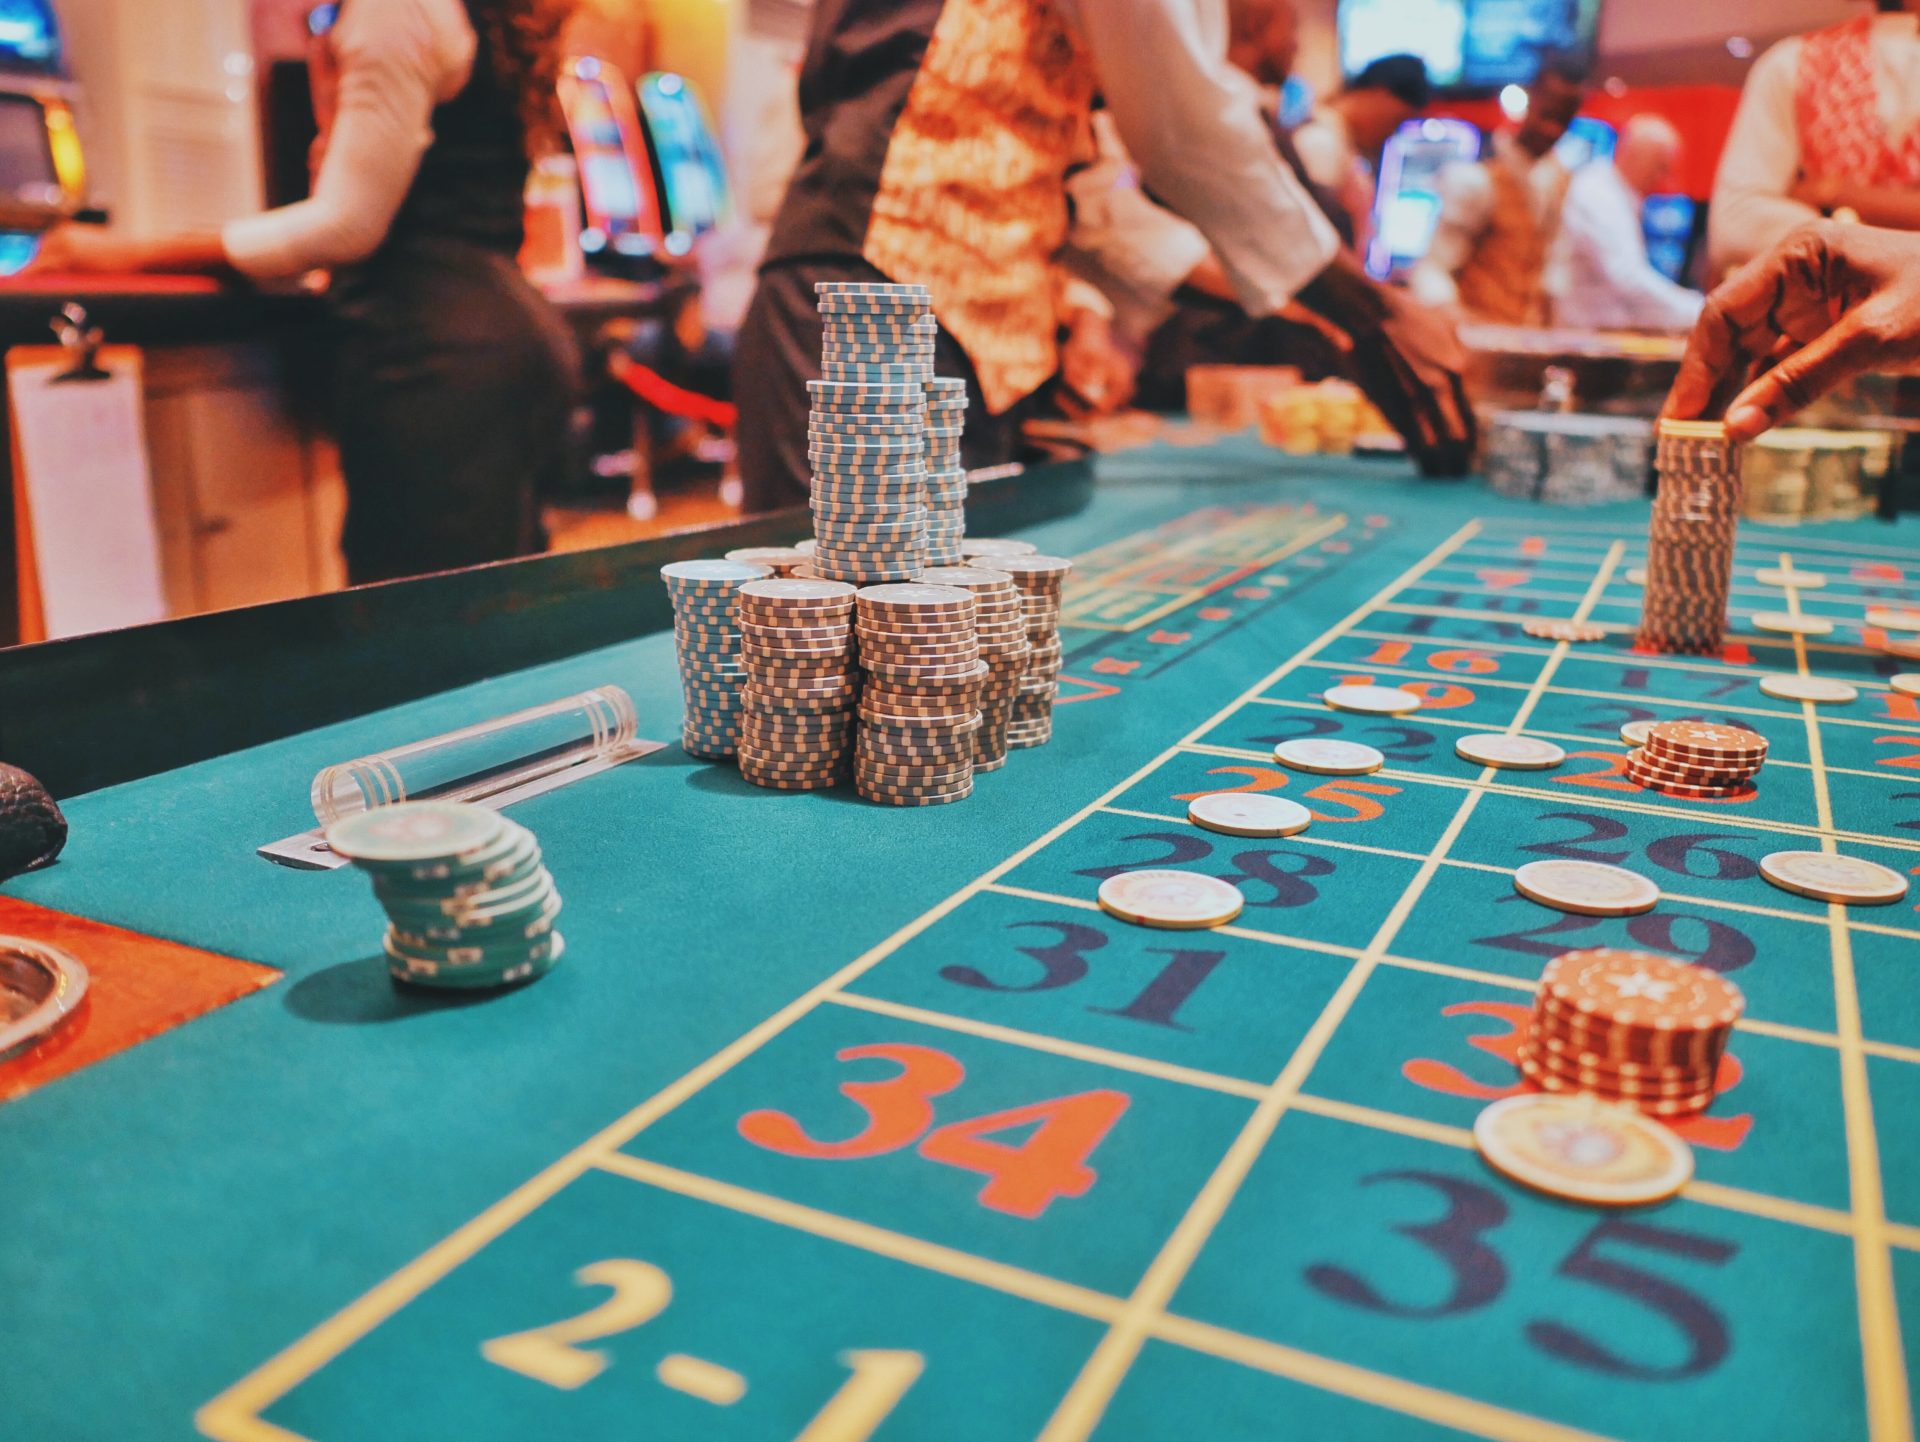 How to develop a strategy for playing casino games